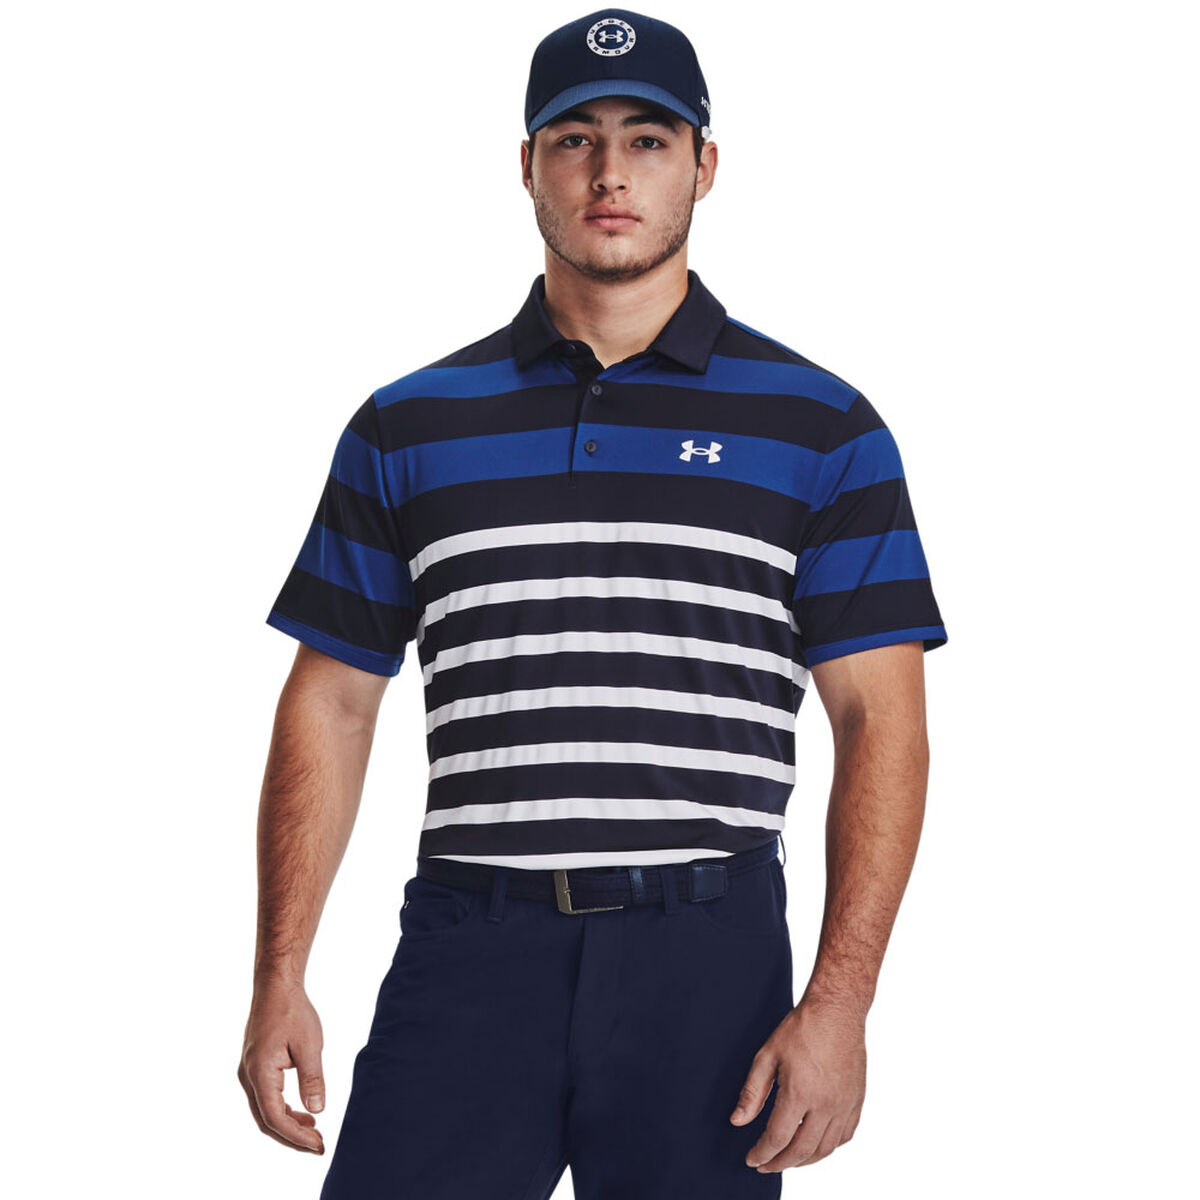 Under Armour Men's Navy Blue and White Playoff 3.0 Rugby YD Stripe Golf Polo Shirt, Size: Small | American Golf von Under Armour